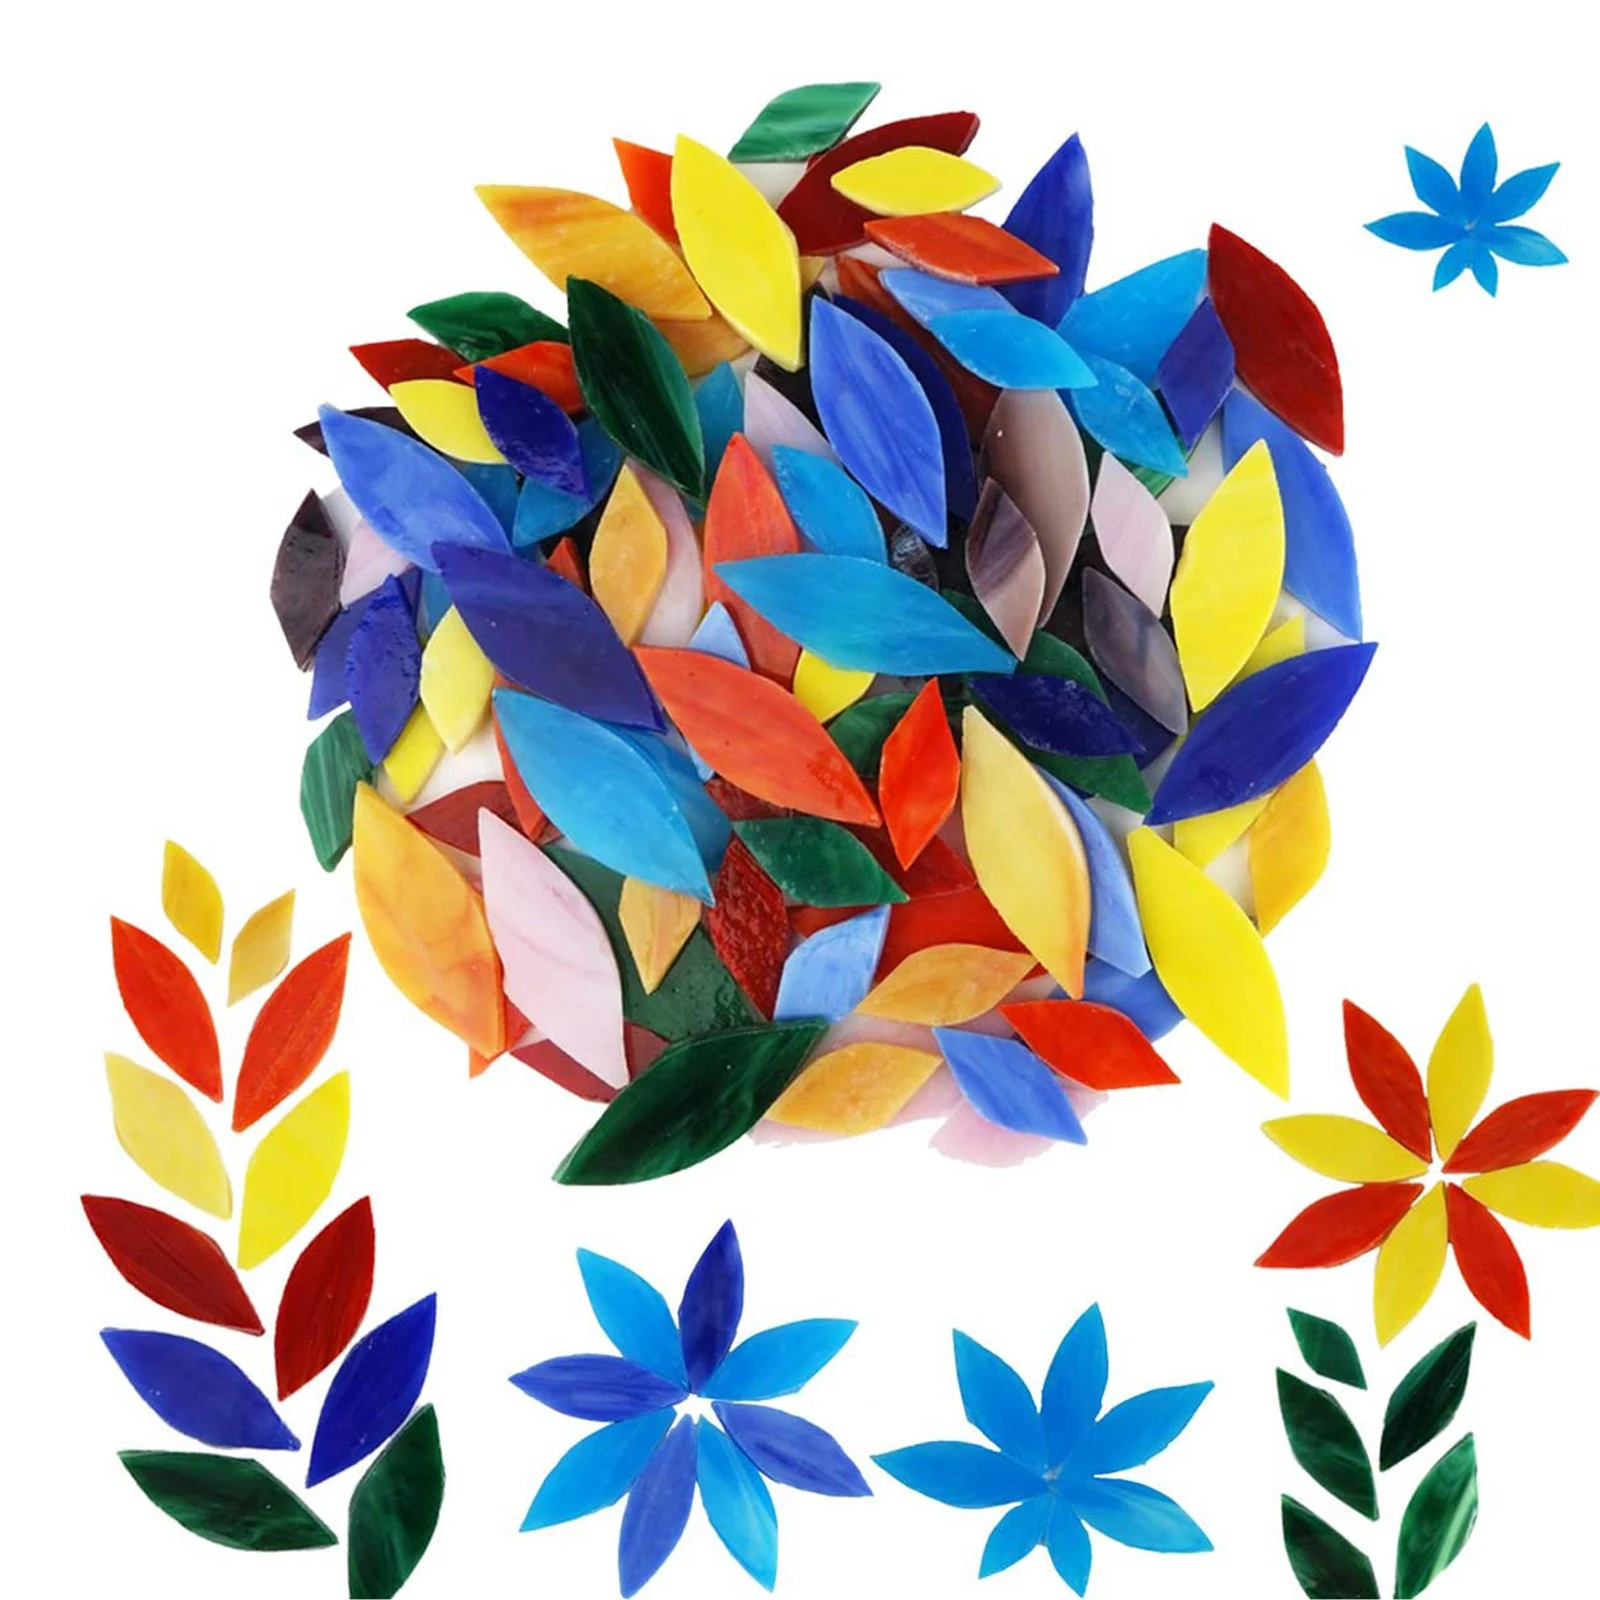 100 Pieces Mixed Colors Mosaic Tiles Flower Leaves Stained Glass for Crafts